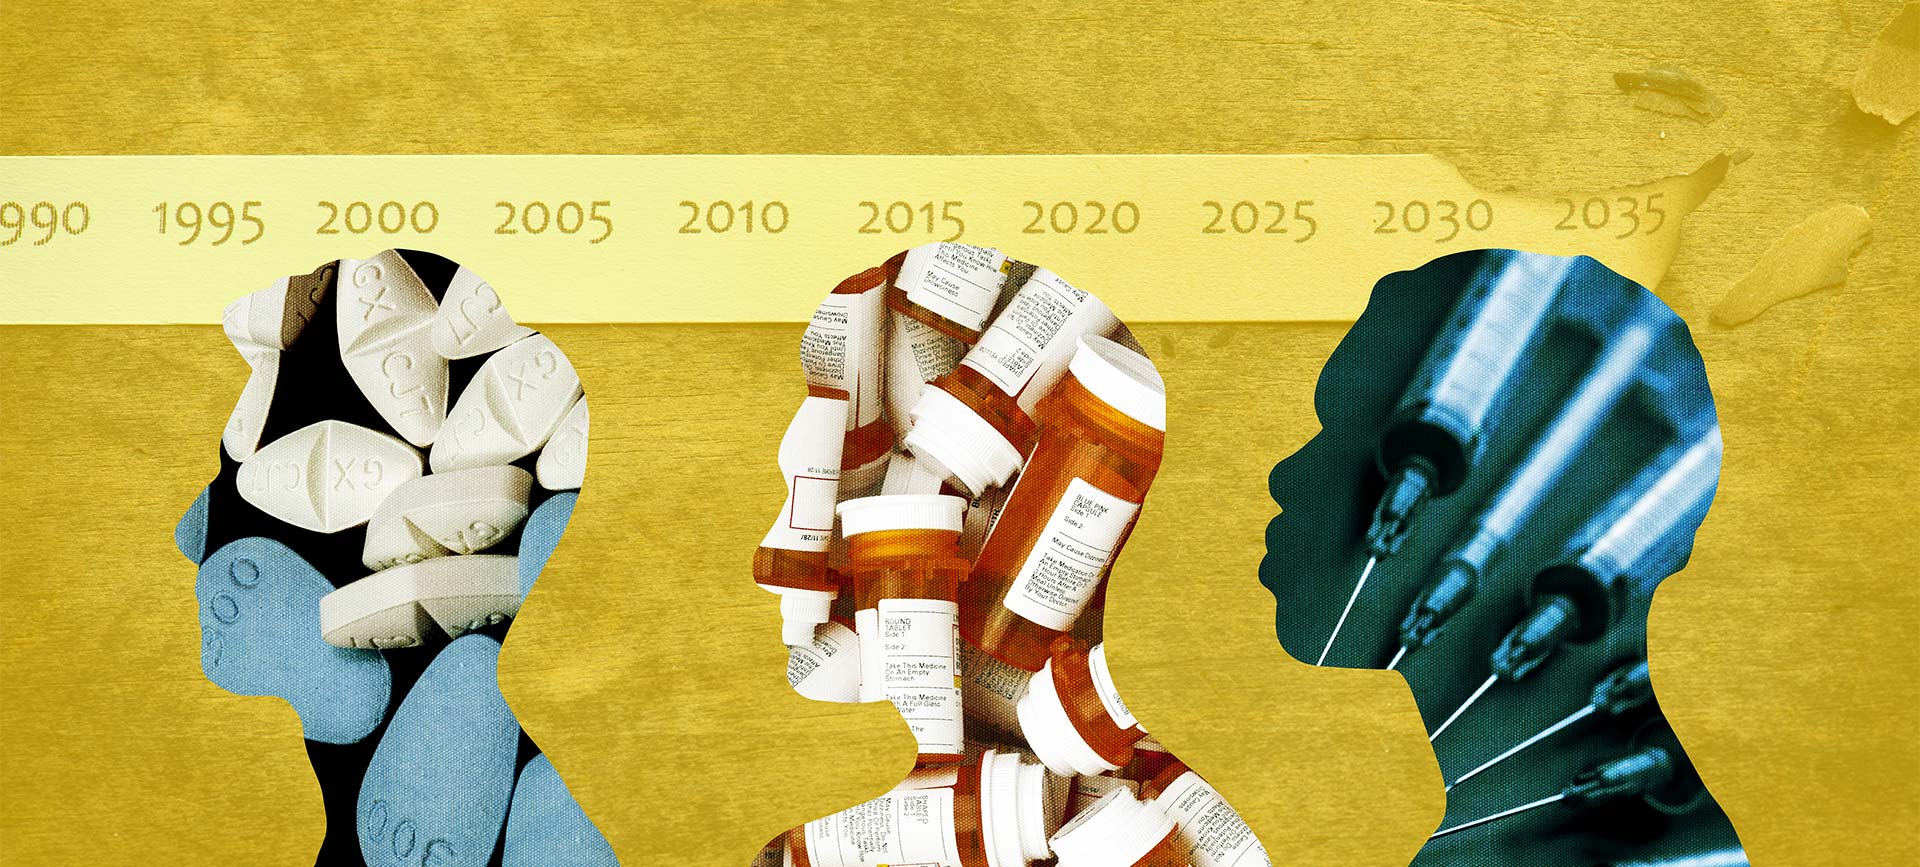 A timeline starting in 1995 and going to 2030 is behind three profiles of heads that are formed from pills and medical needles.